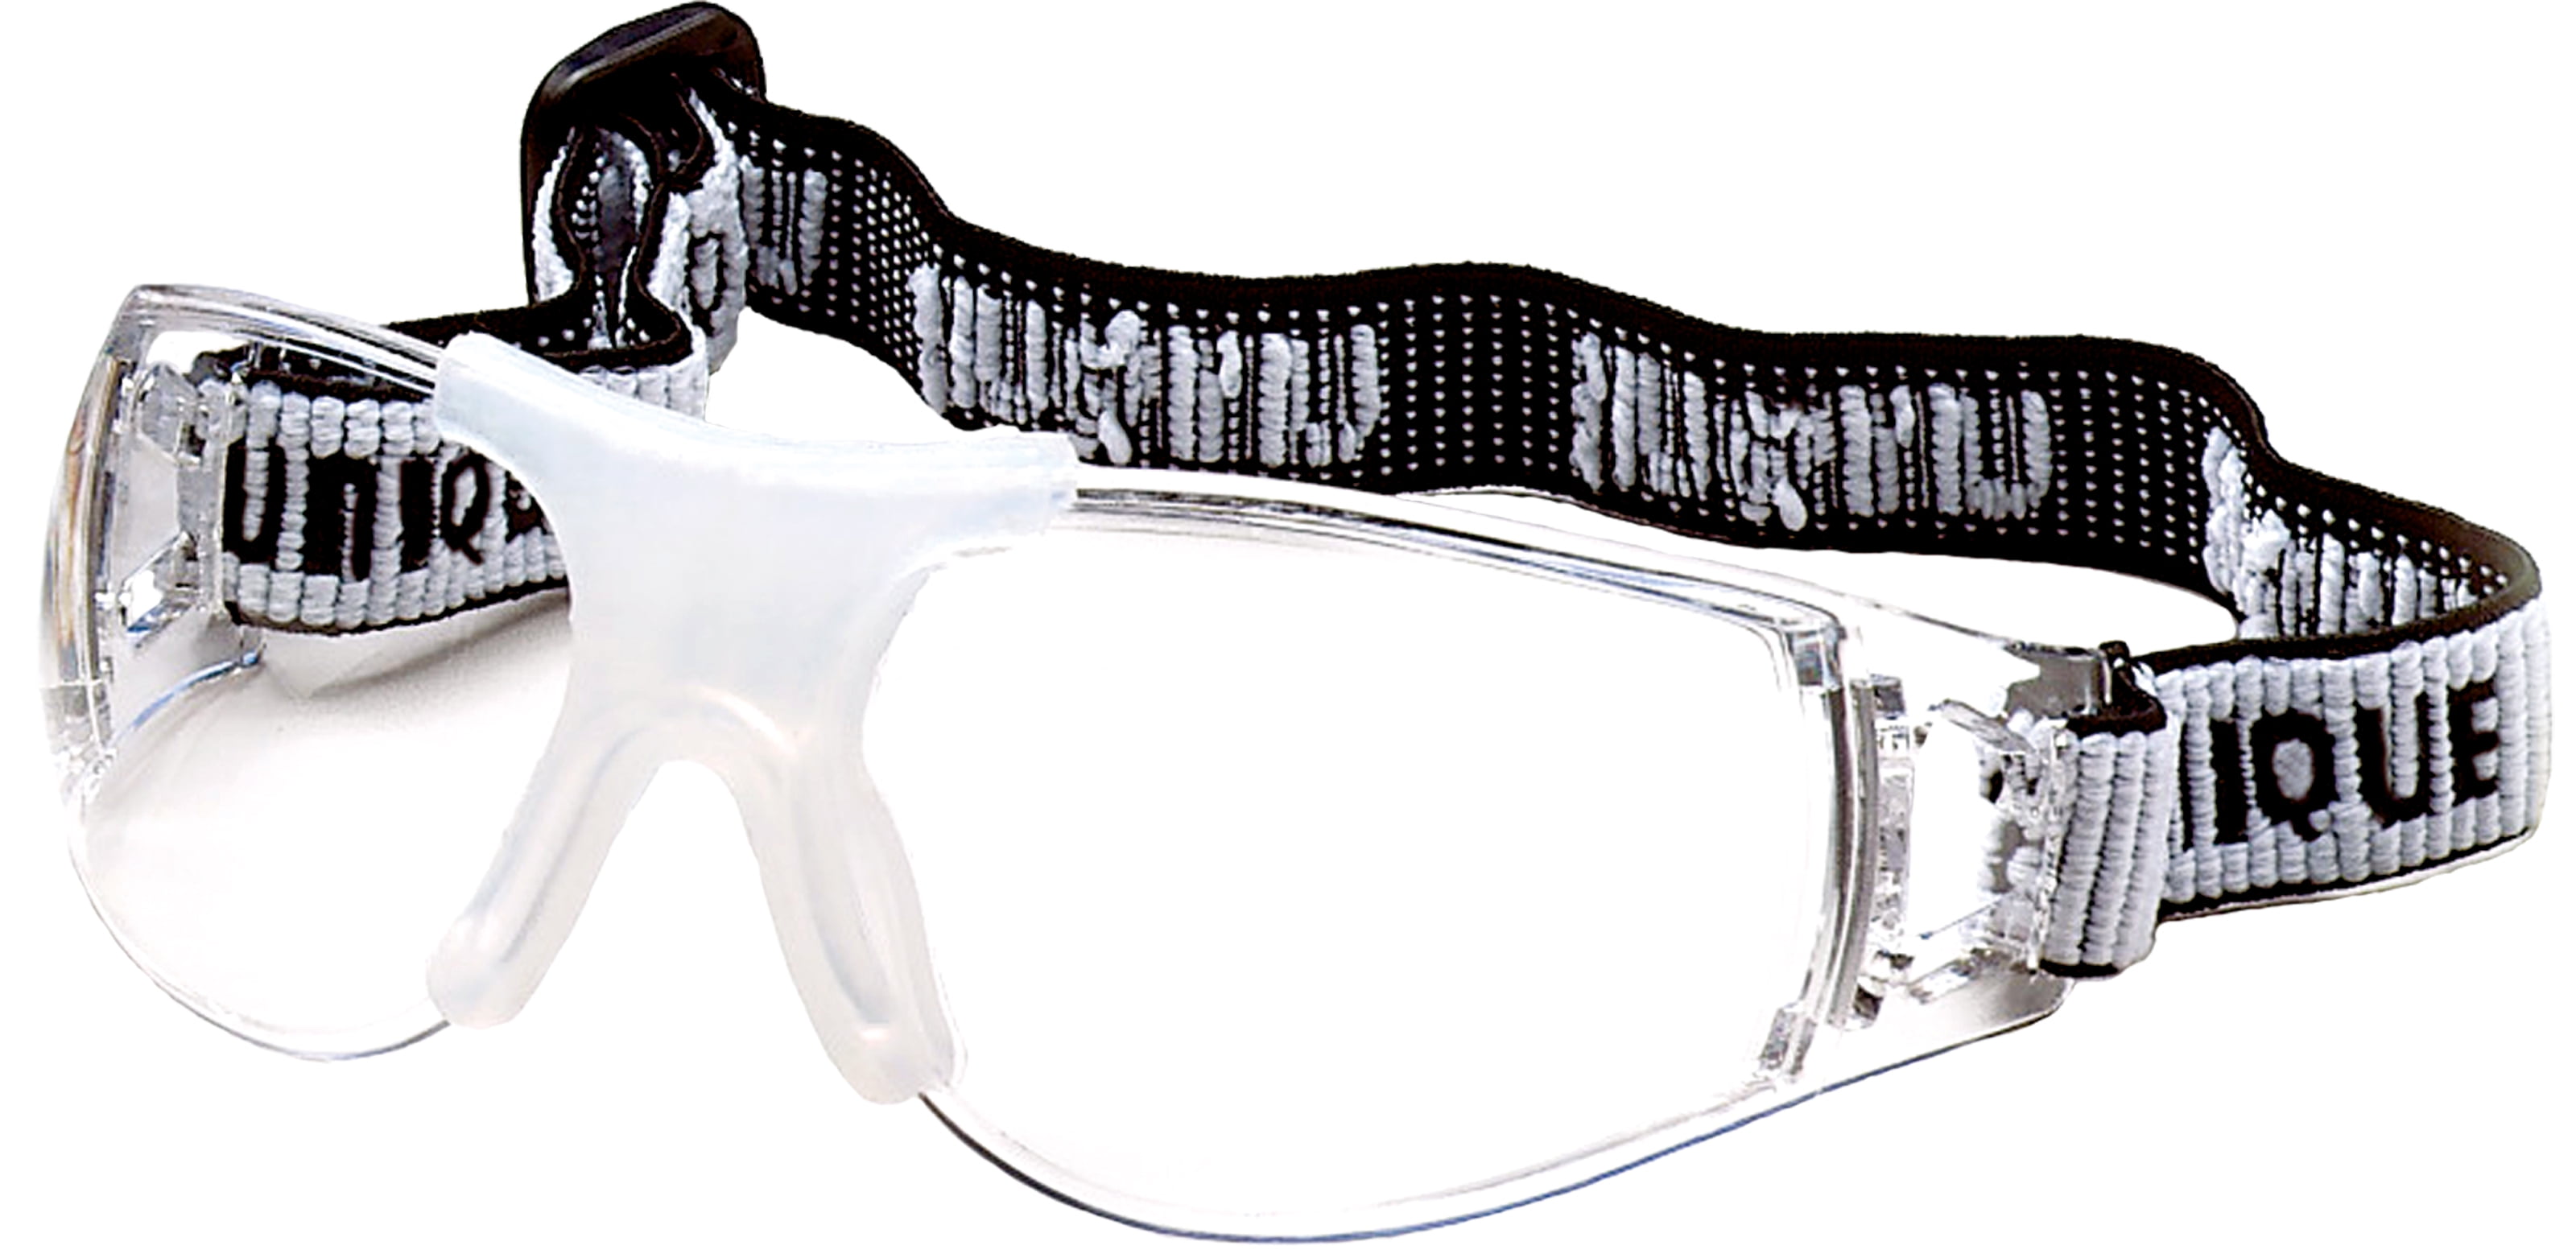 Unique Sports Super Specs Youth Eye Protectors - Clear